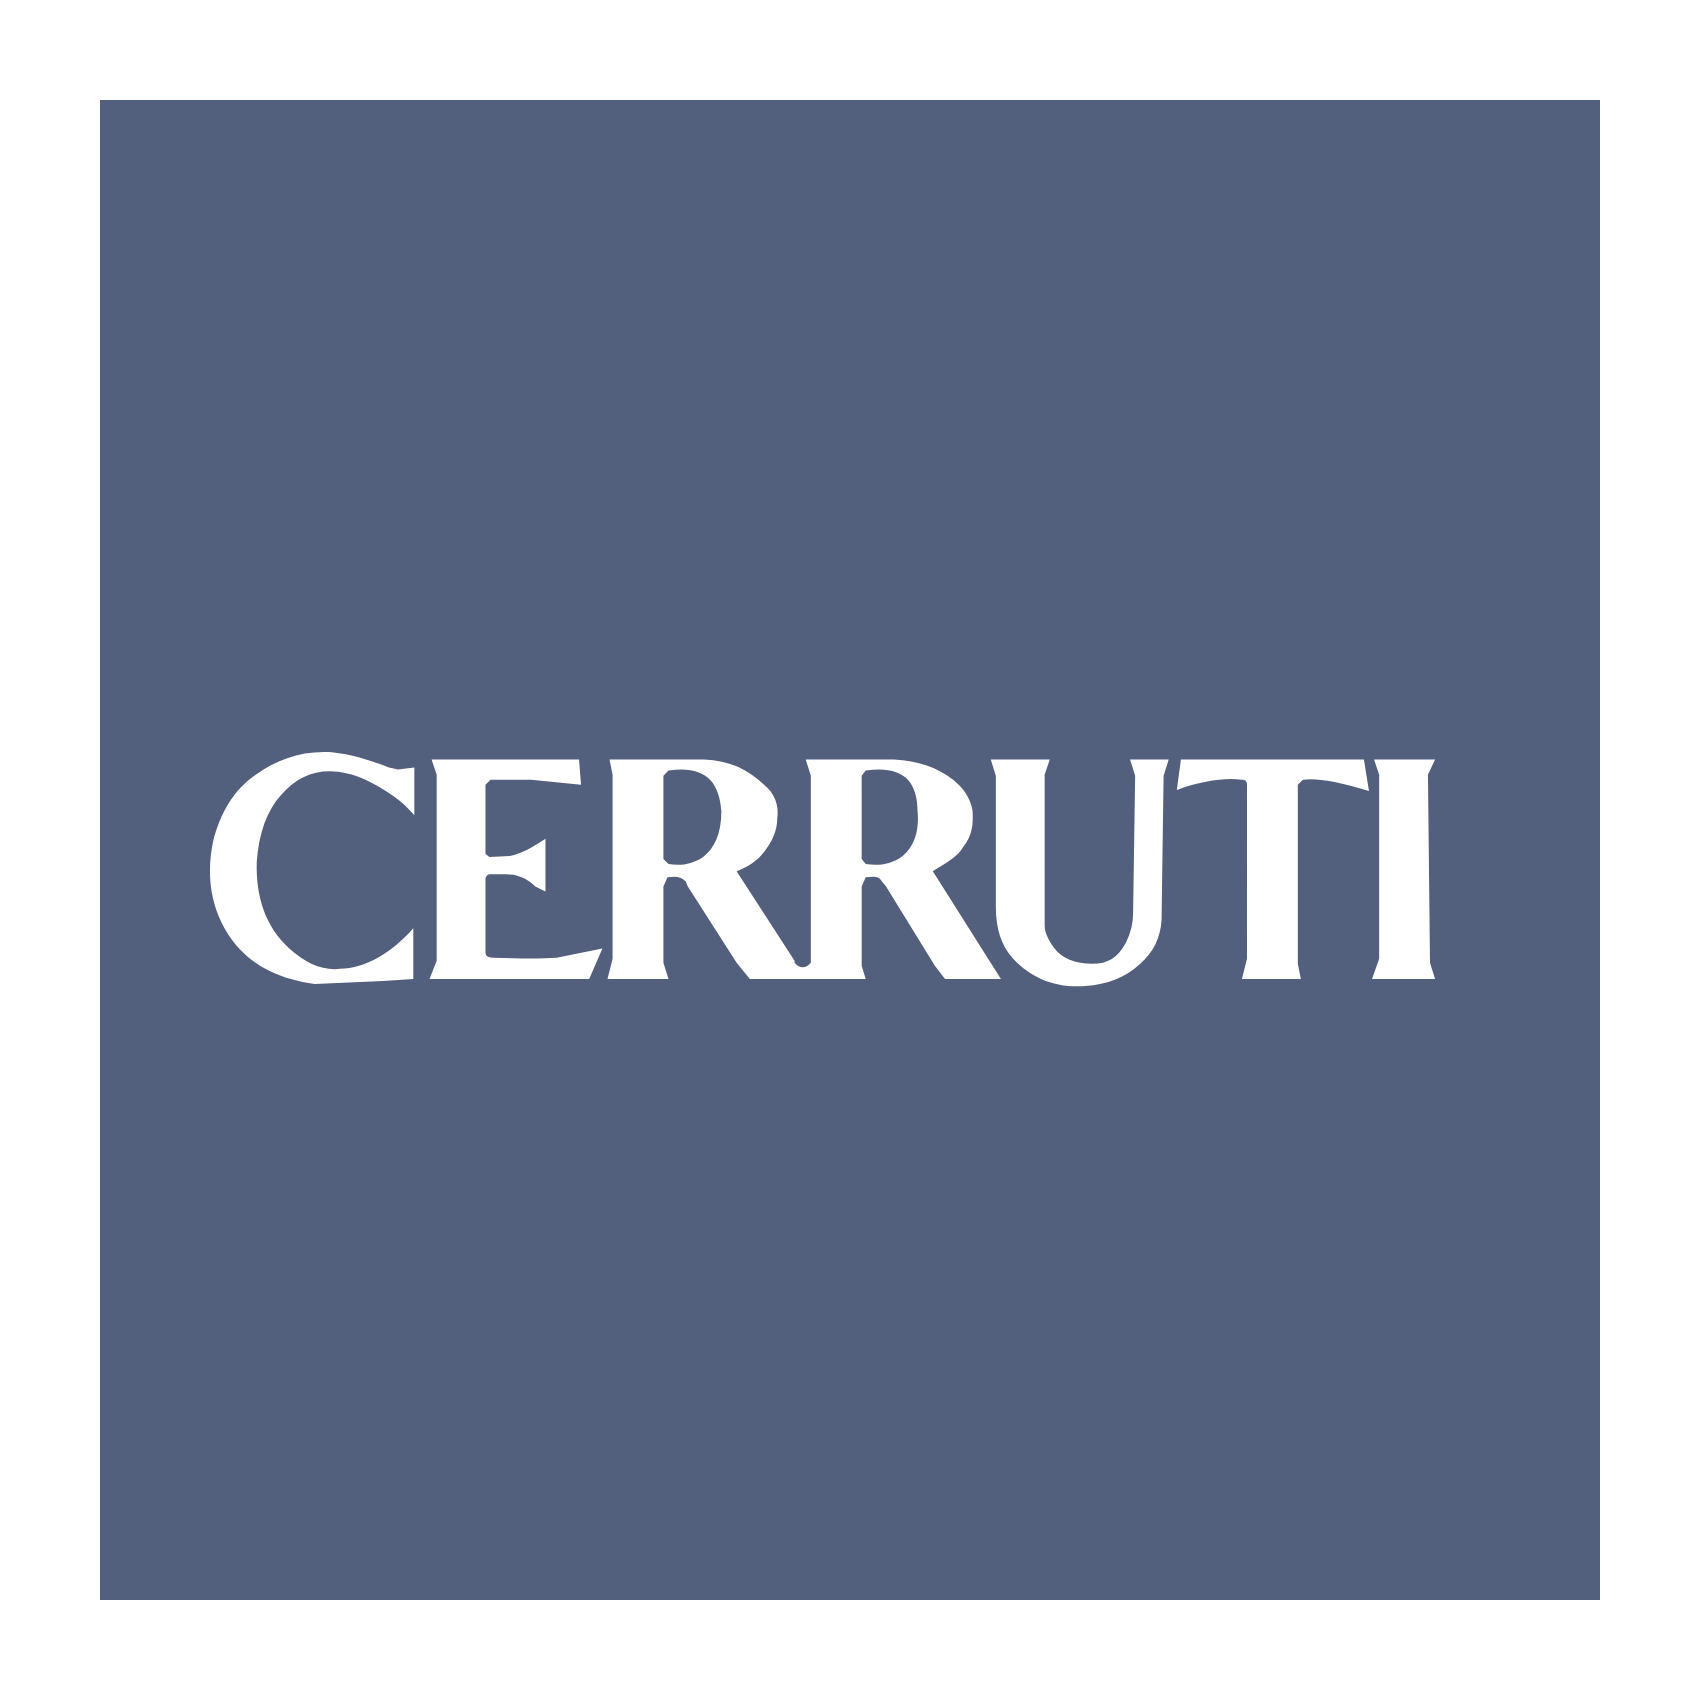 Download Cerutti Logo PNG and Vector (PDF, SVG, Ai, EPS) Free